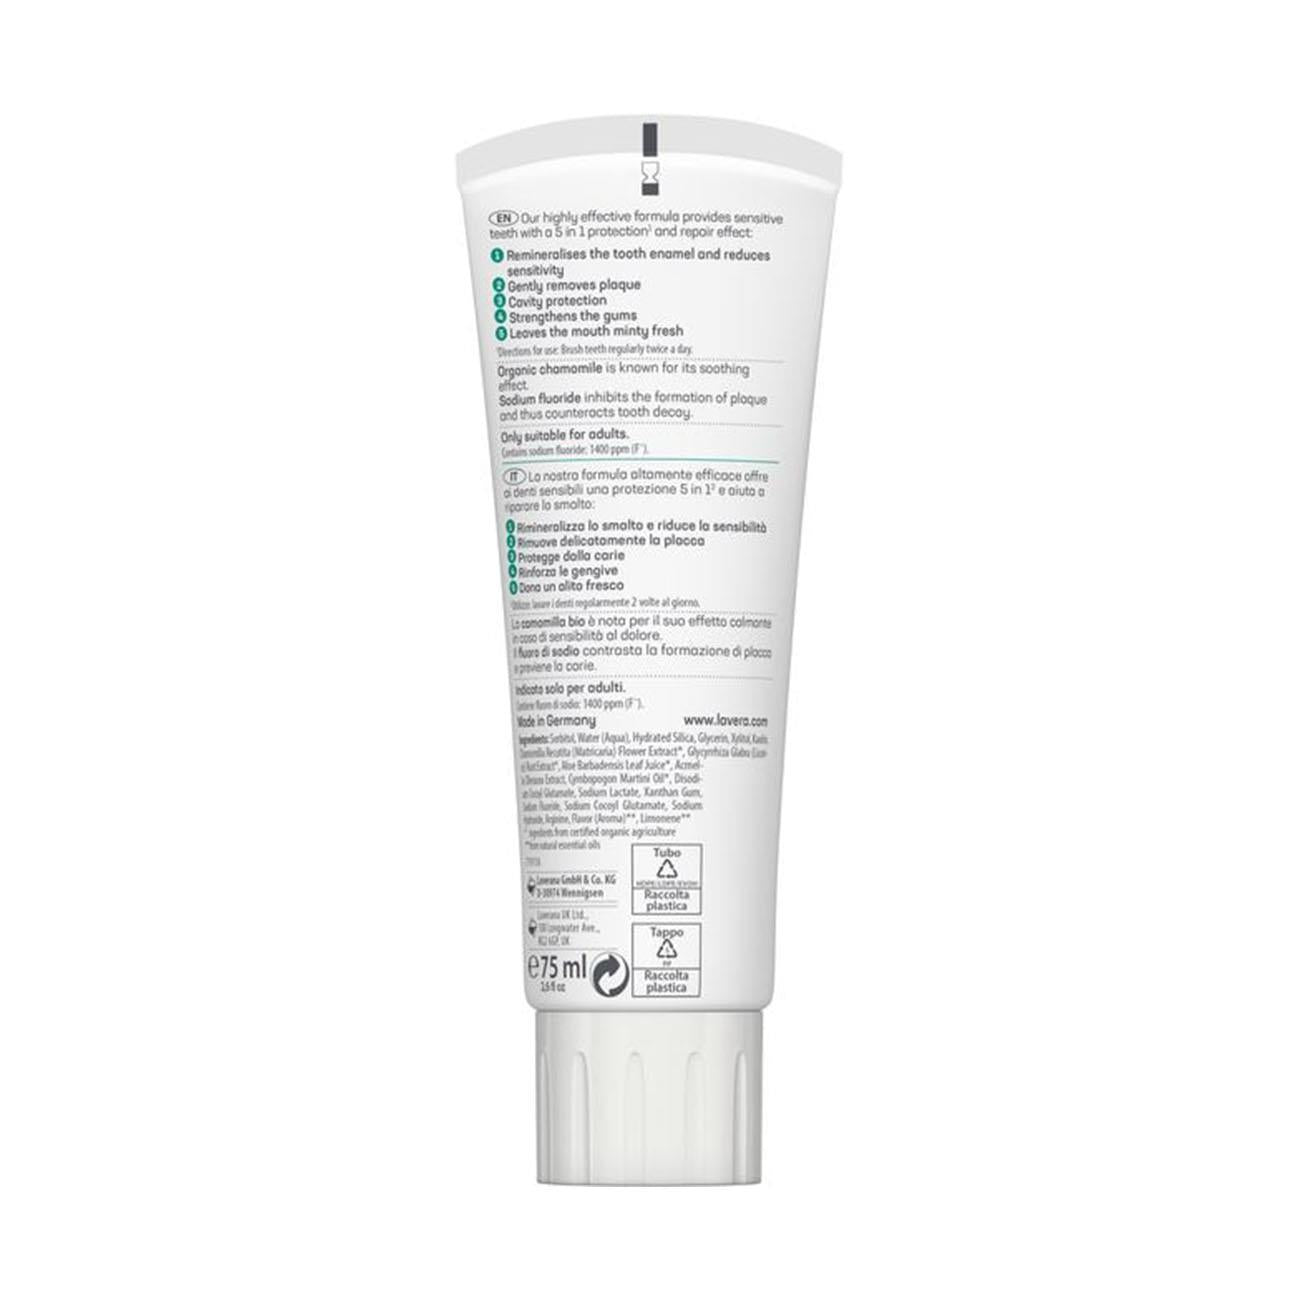 Organic Sensitive & Repair Toothpaste with Fluoride New 75ml